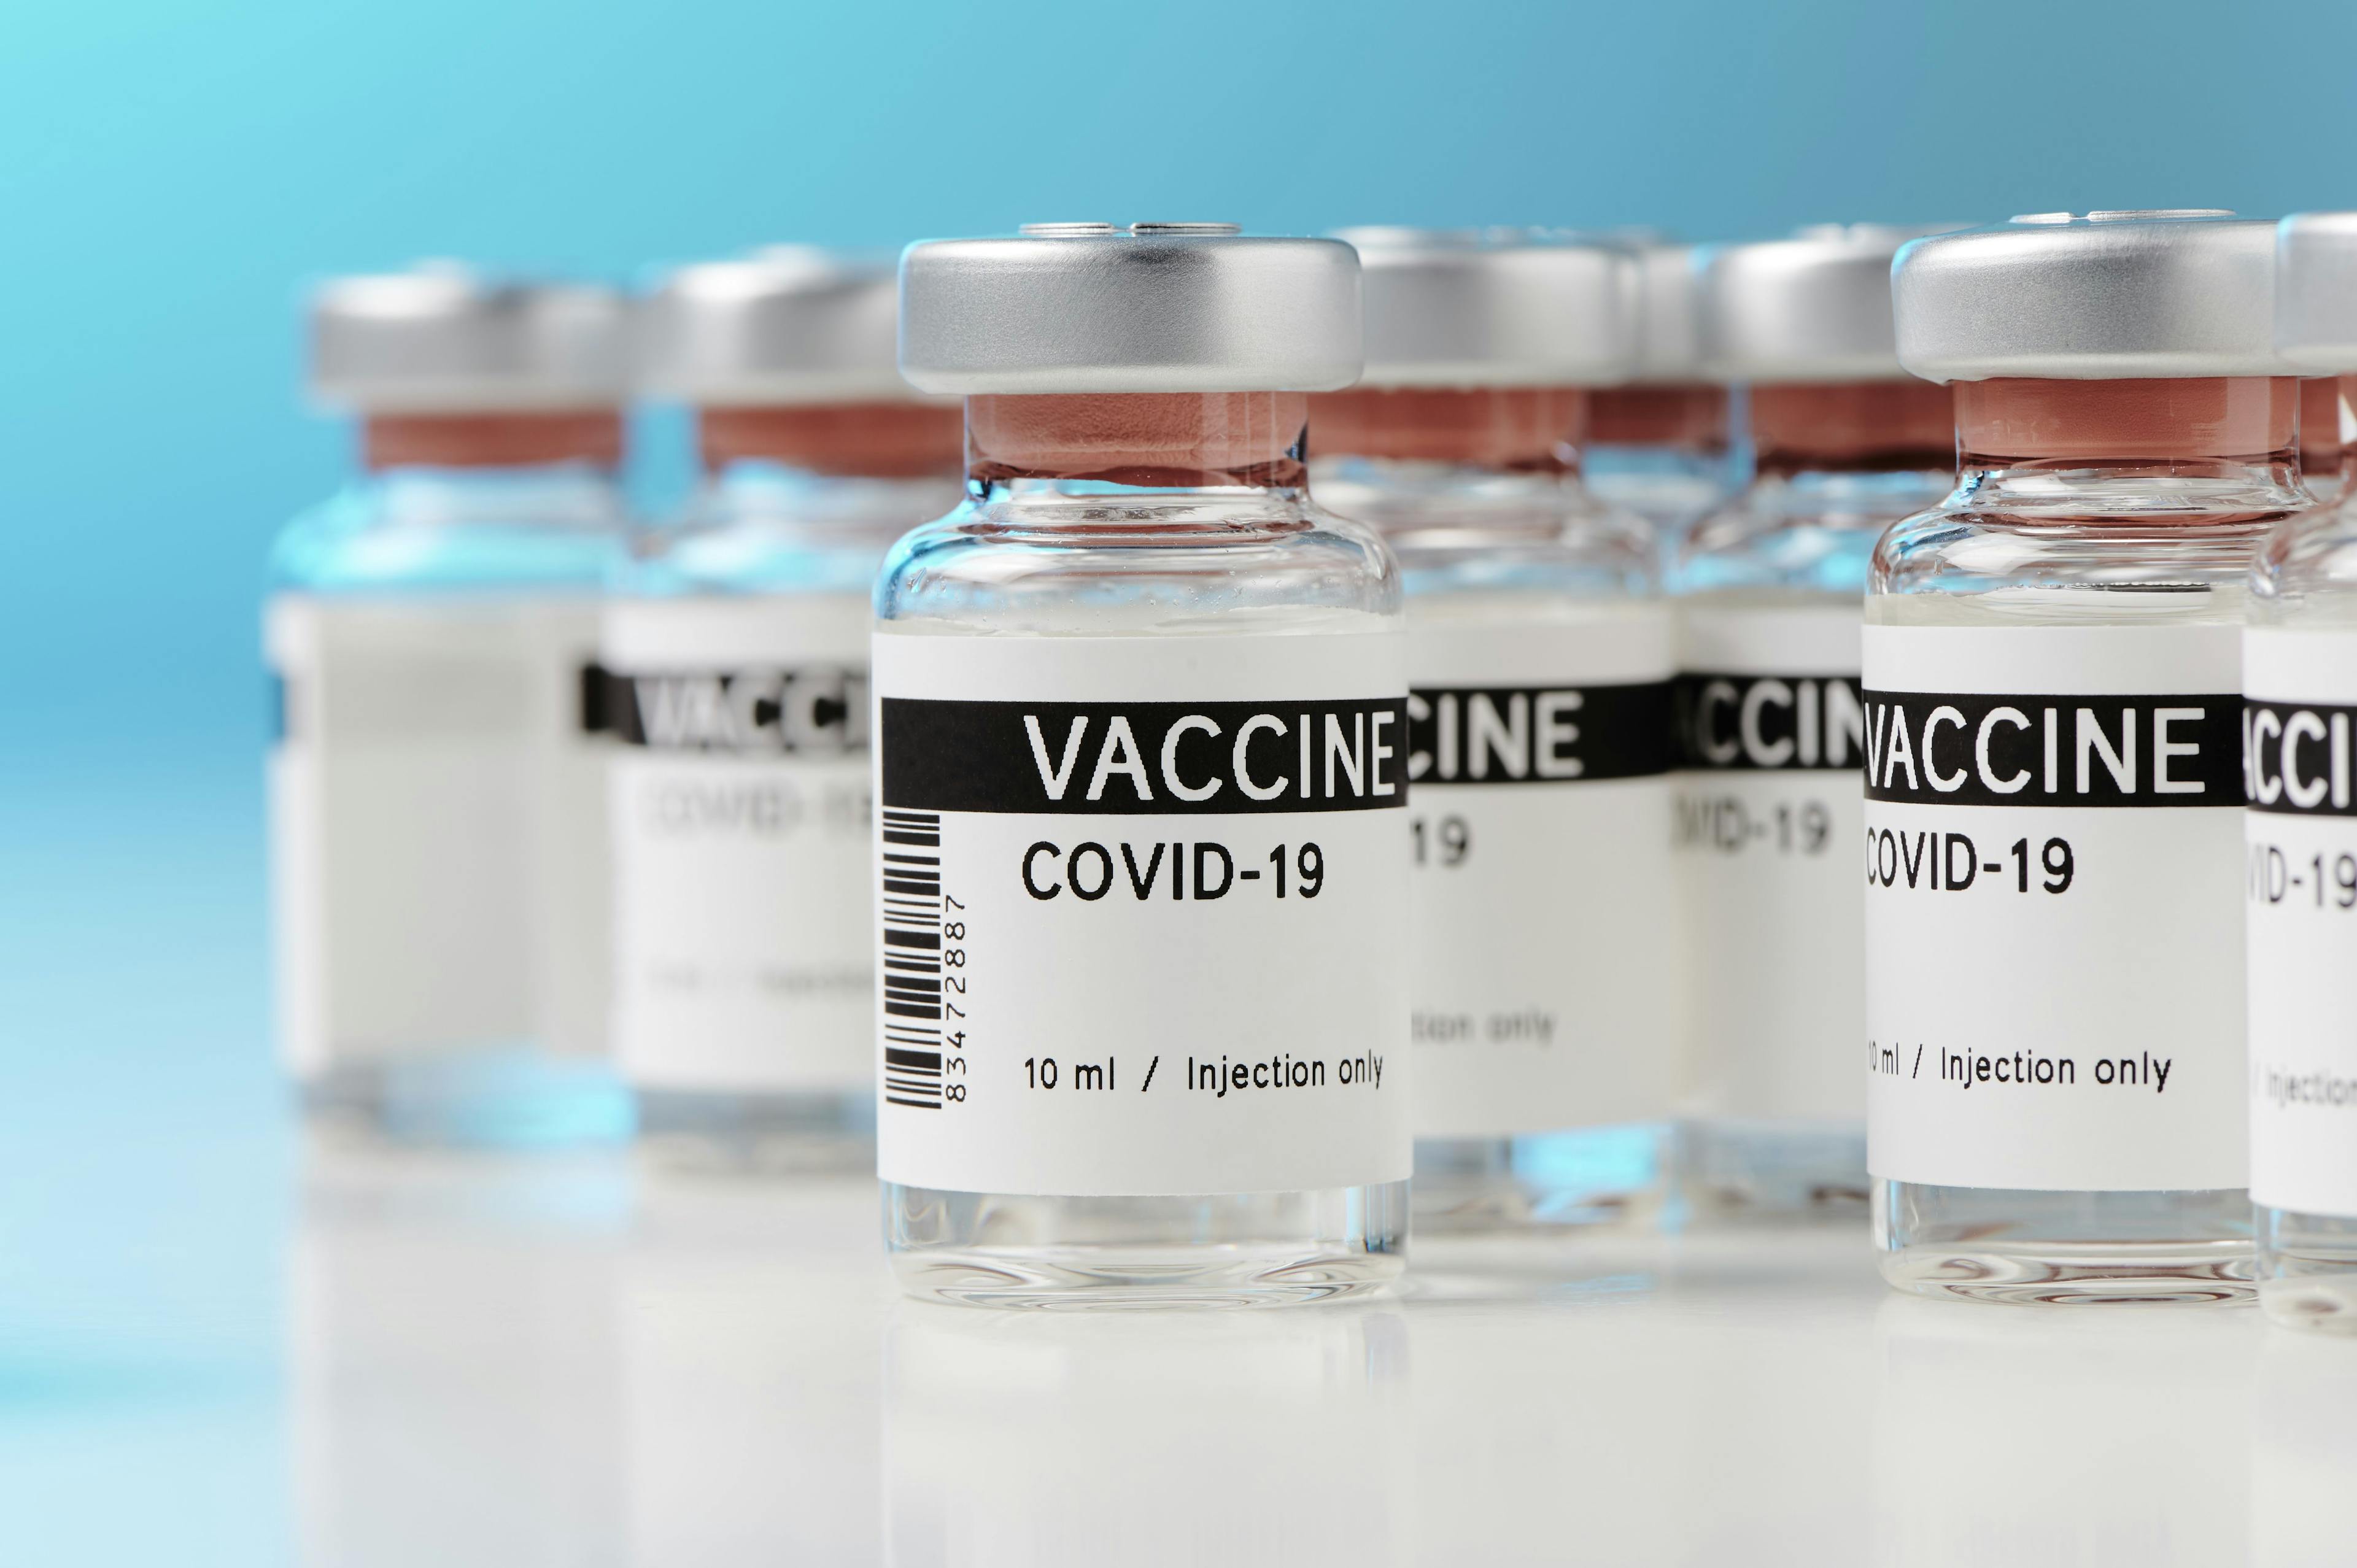 Sanofi and GSK’s COVID-19 vaccine may be available this year